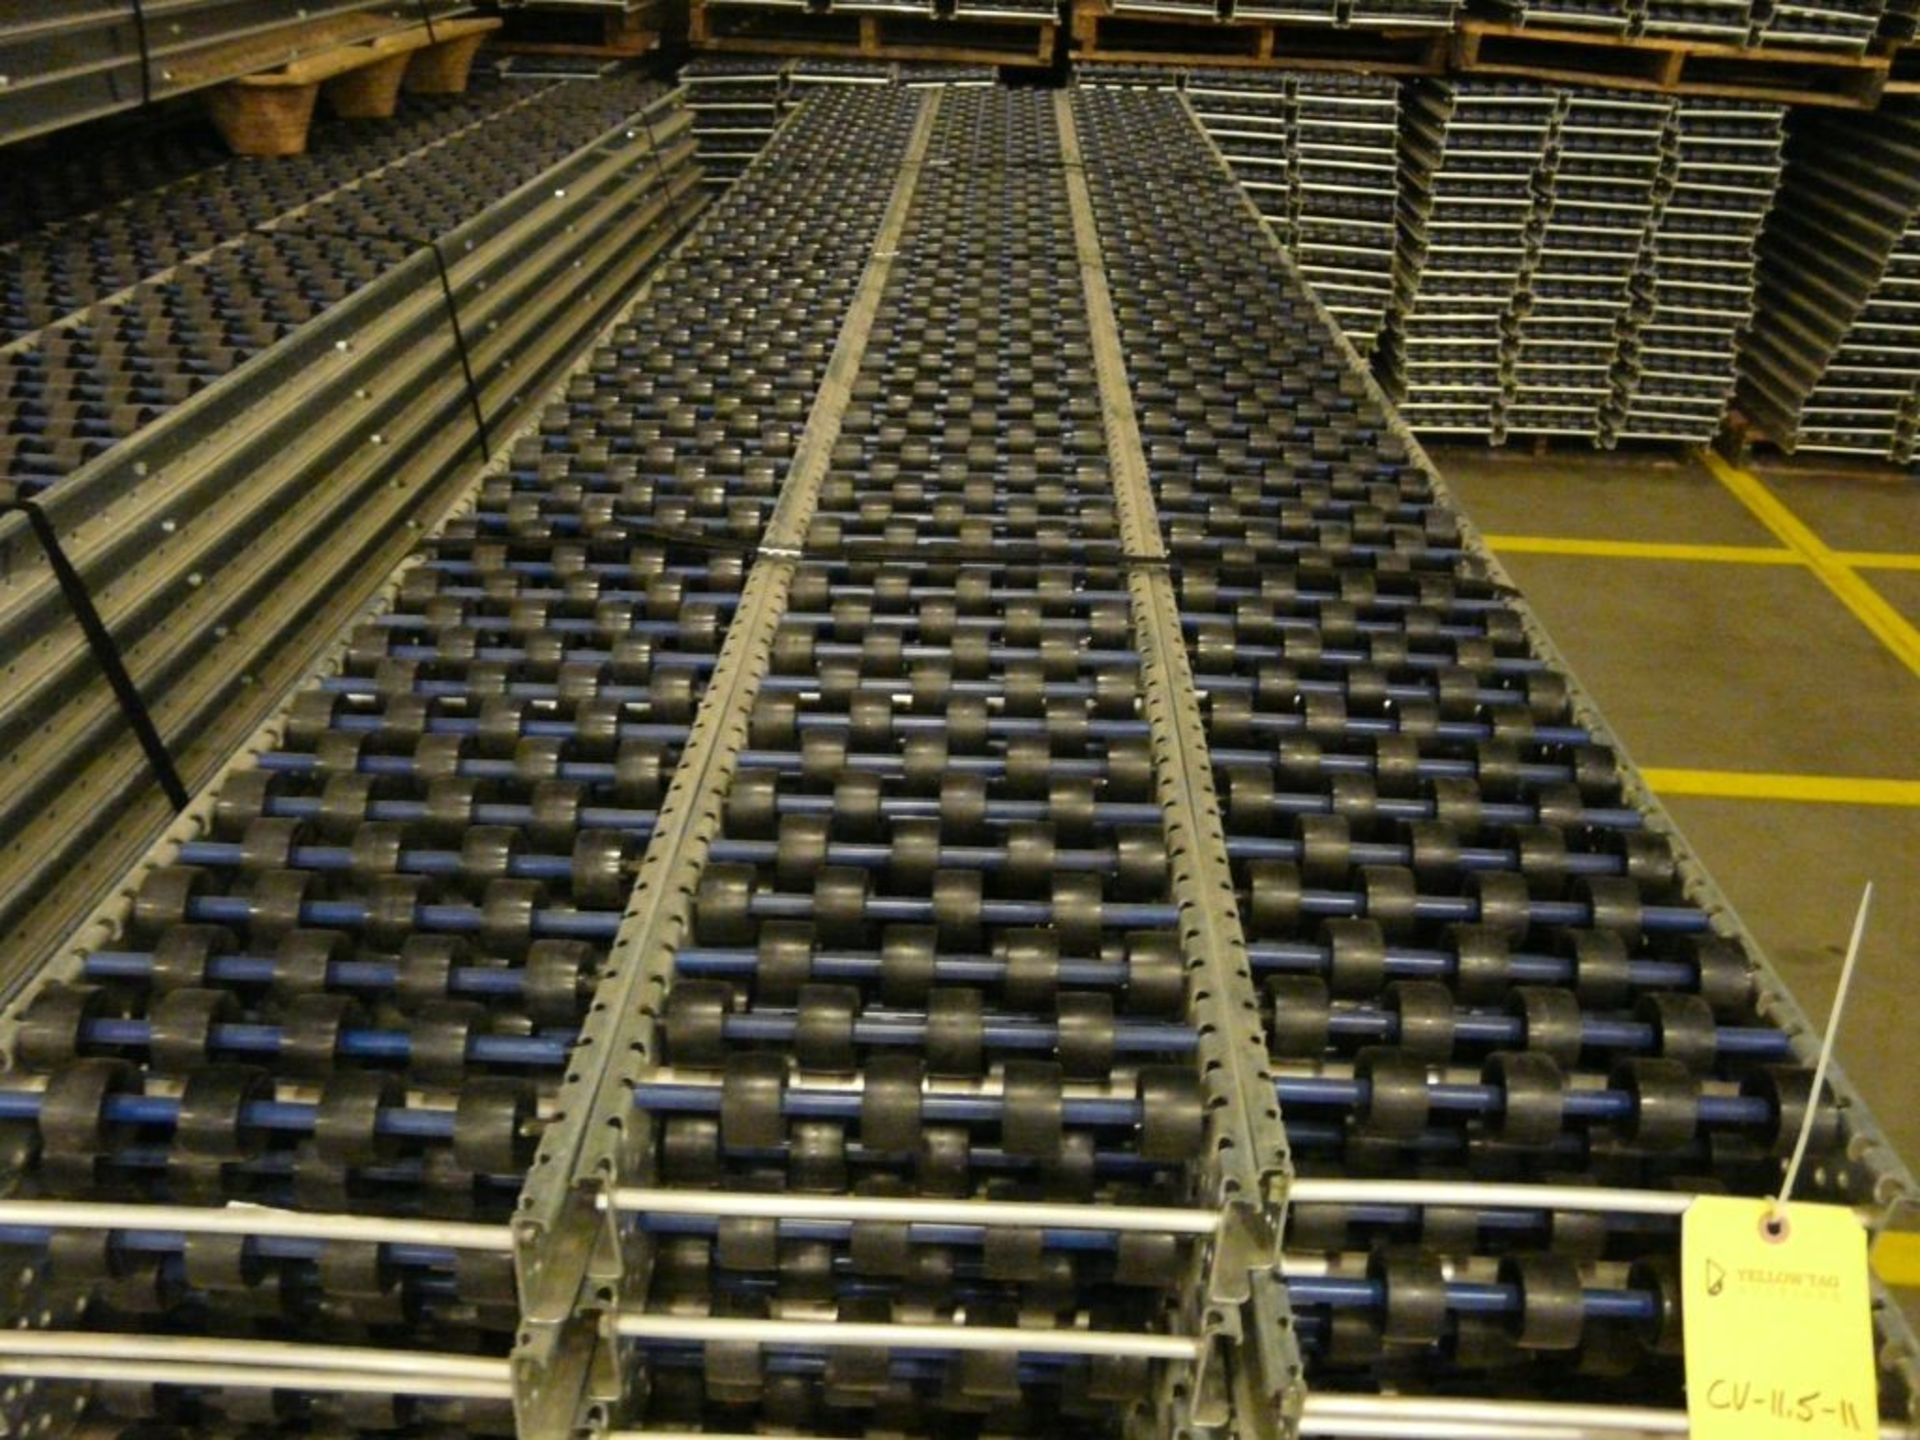 Lot of (90) SpanTrack Wheelbed Carton Flow Conveyors - 11.5'L x 11"W; Tag: 223622 - $30 Lot - Image 3 of 4